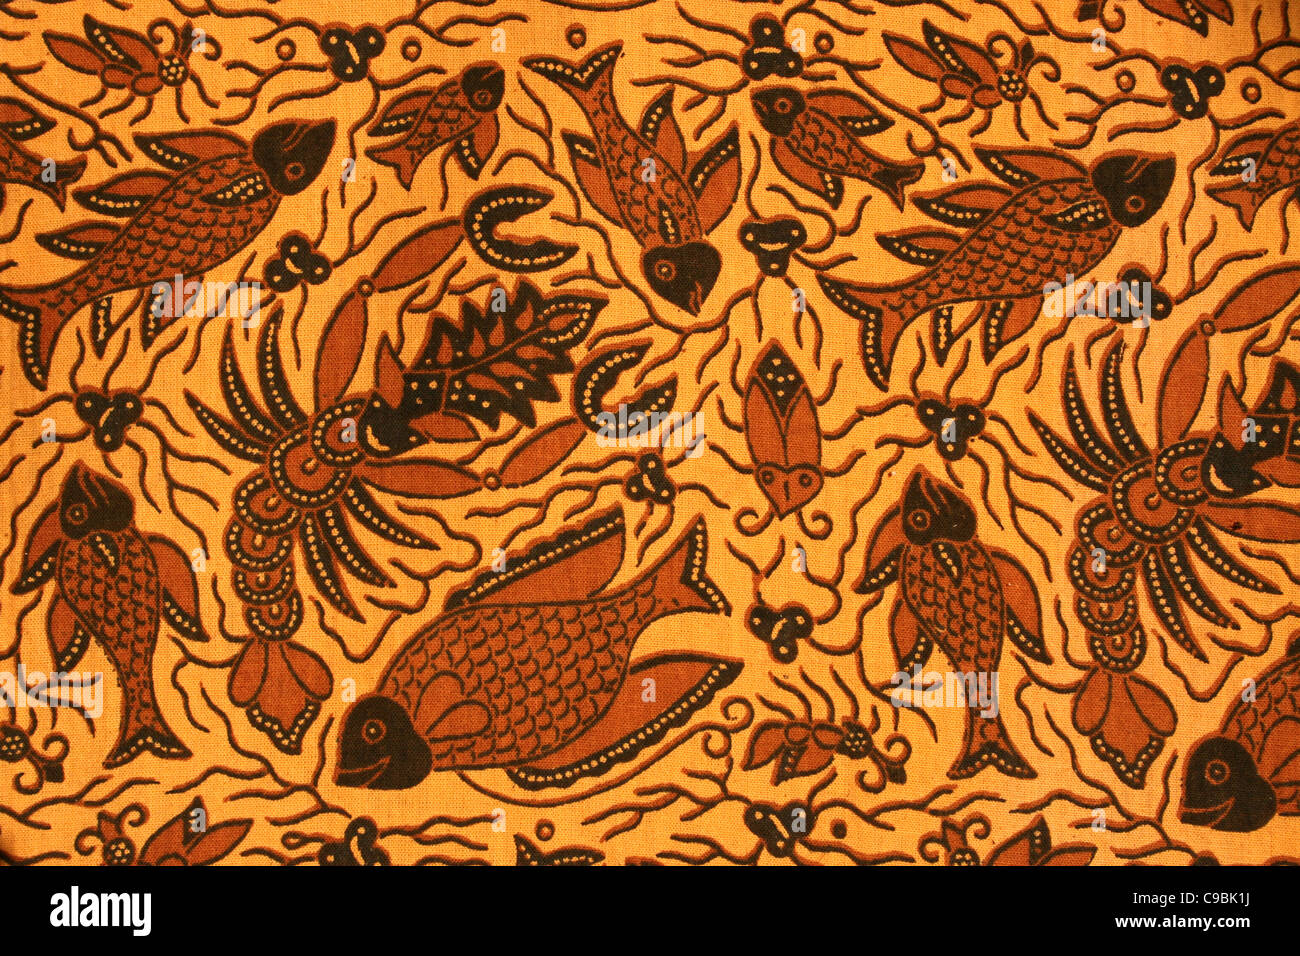 Traditional Batik Work From Indonesia Stock Photo